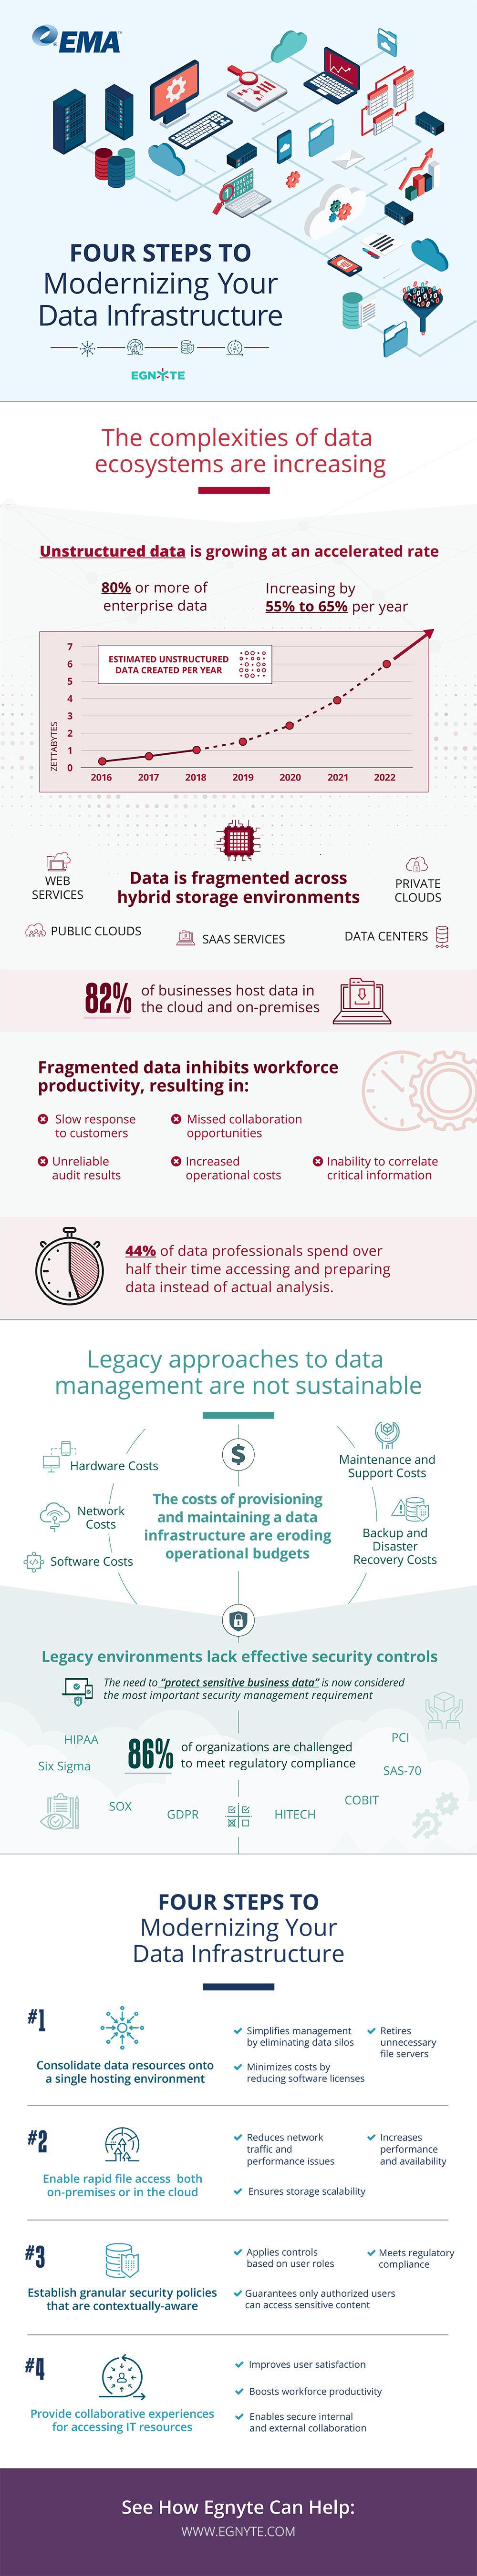 Infographic - Four Steps To Modernizing Your Data Infrastructure